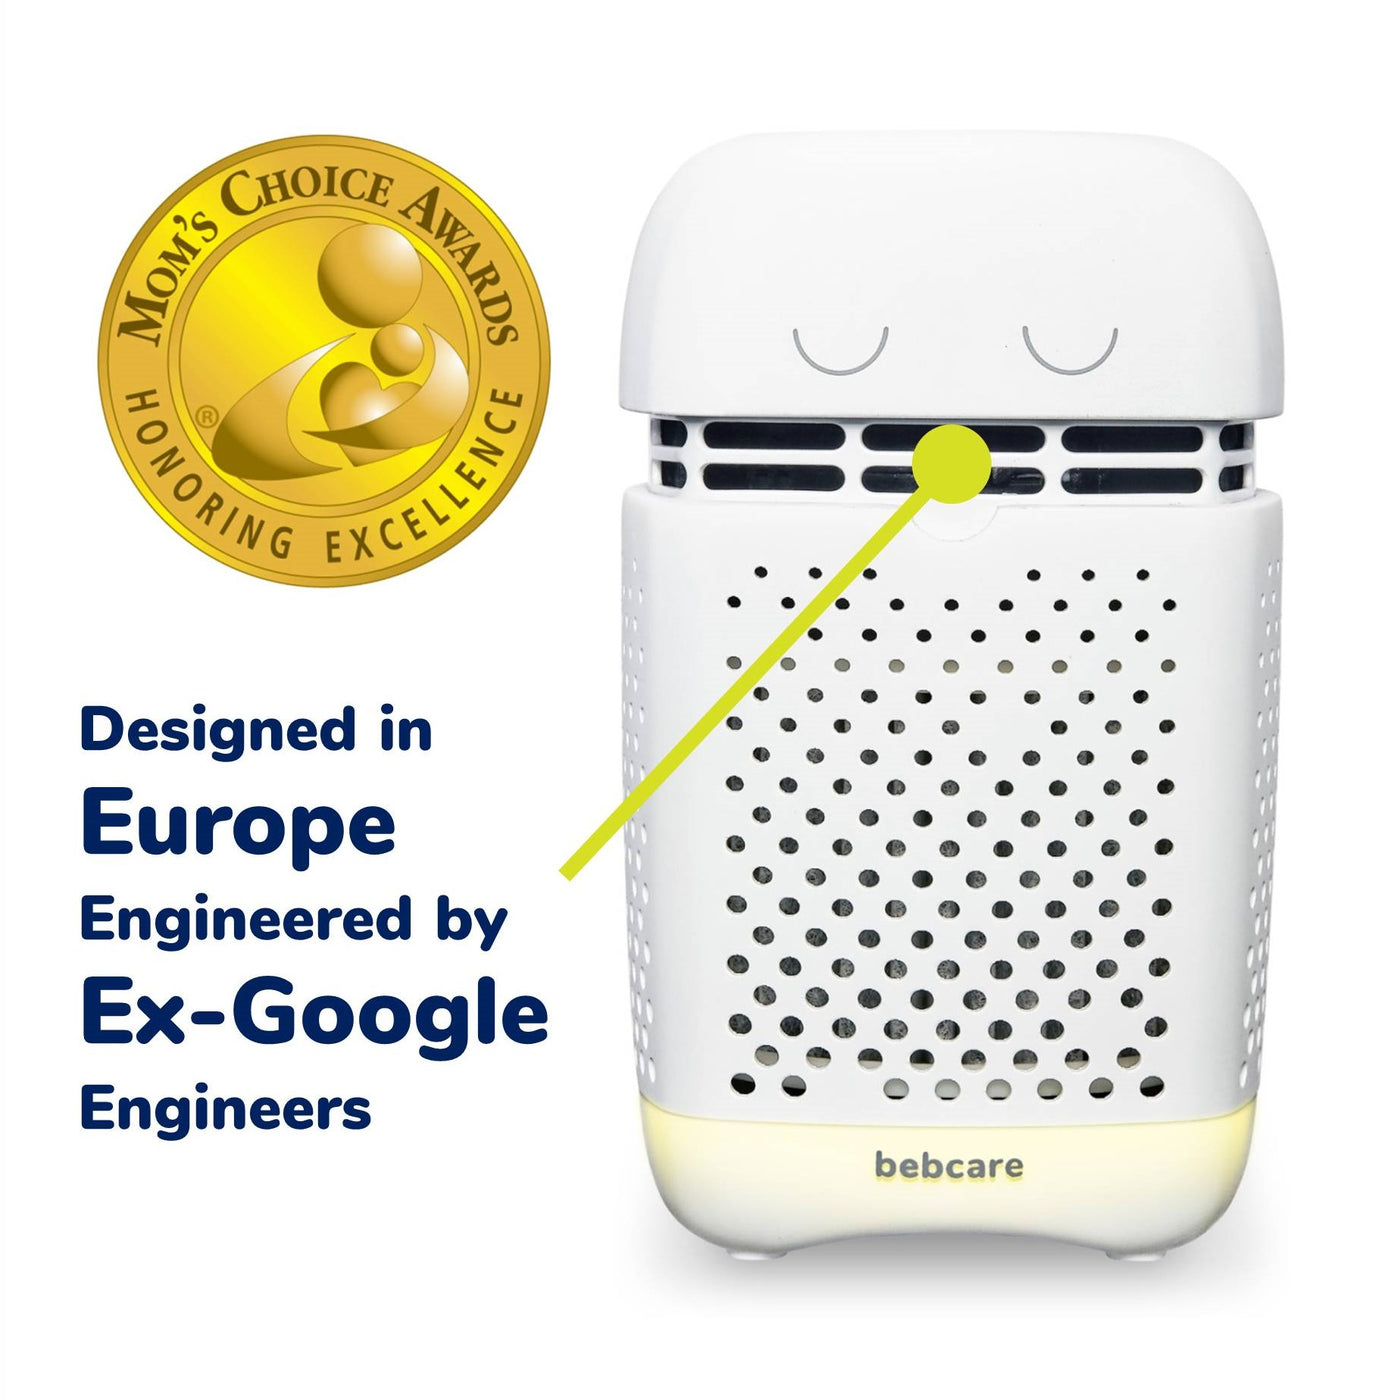 The Bebcare Air was designed in Europe and engineered by ex-Google engineers